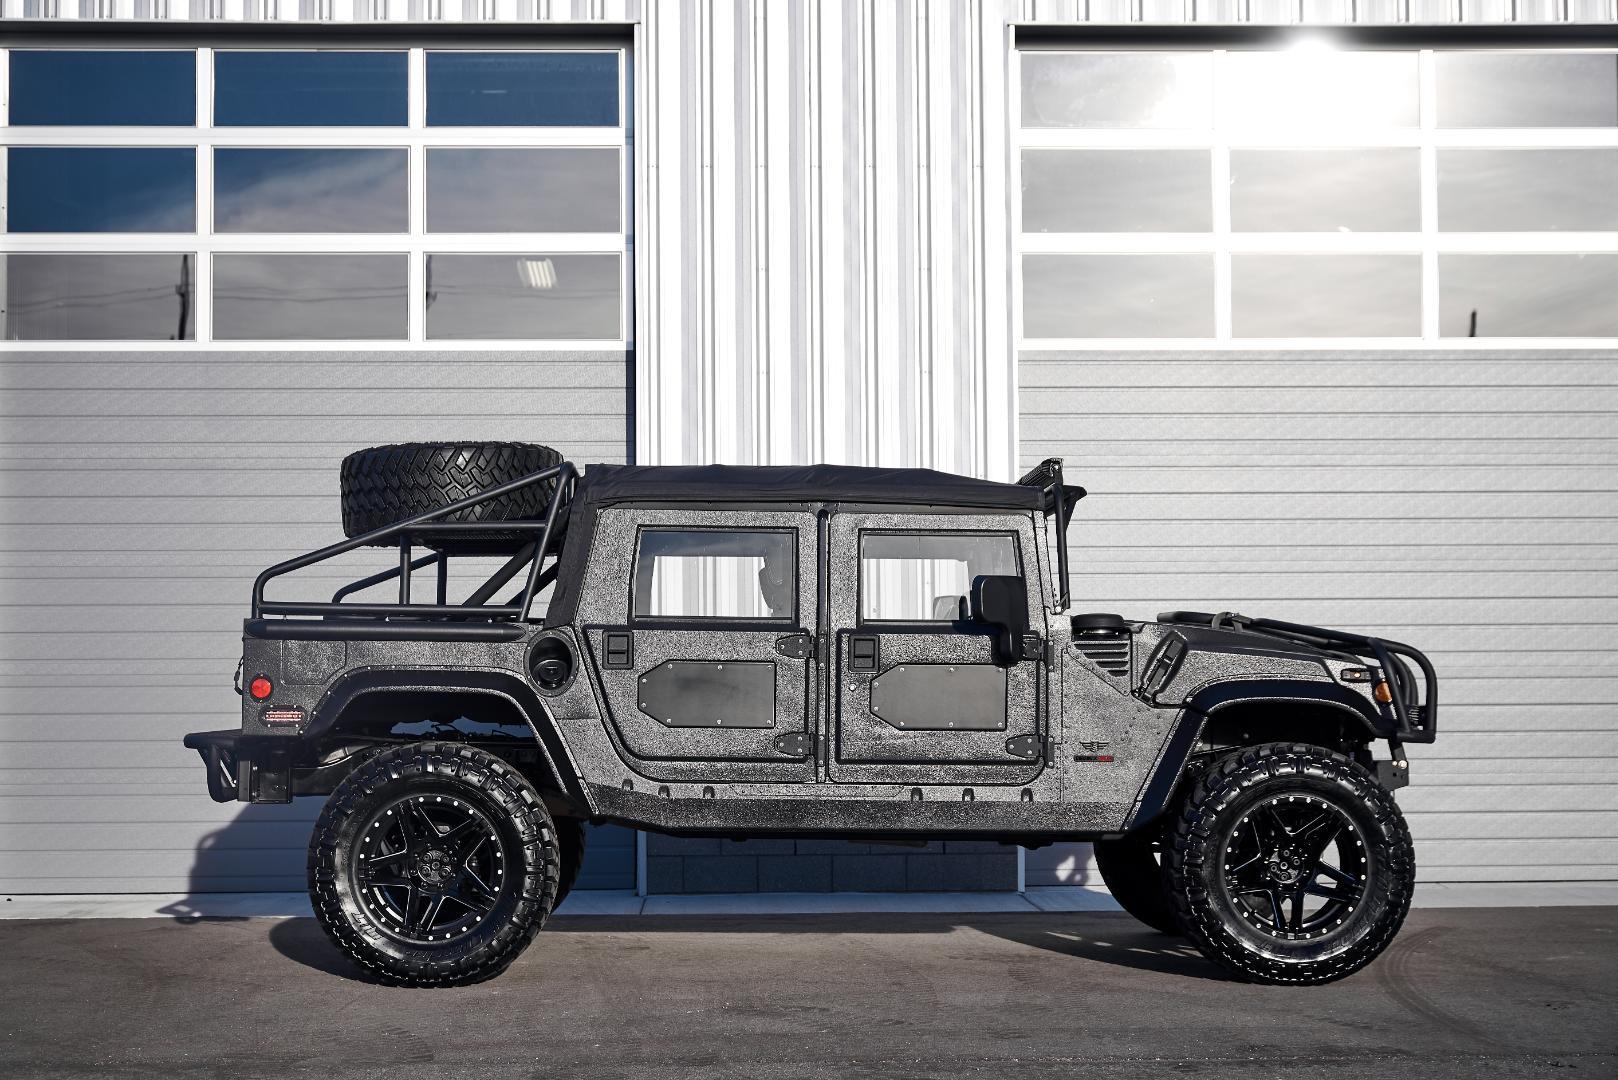 Mil-Spec Auto Hummer H1 "Launch Edition" - TheArsenale